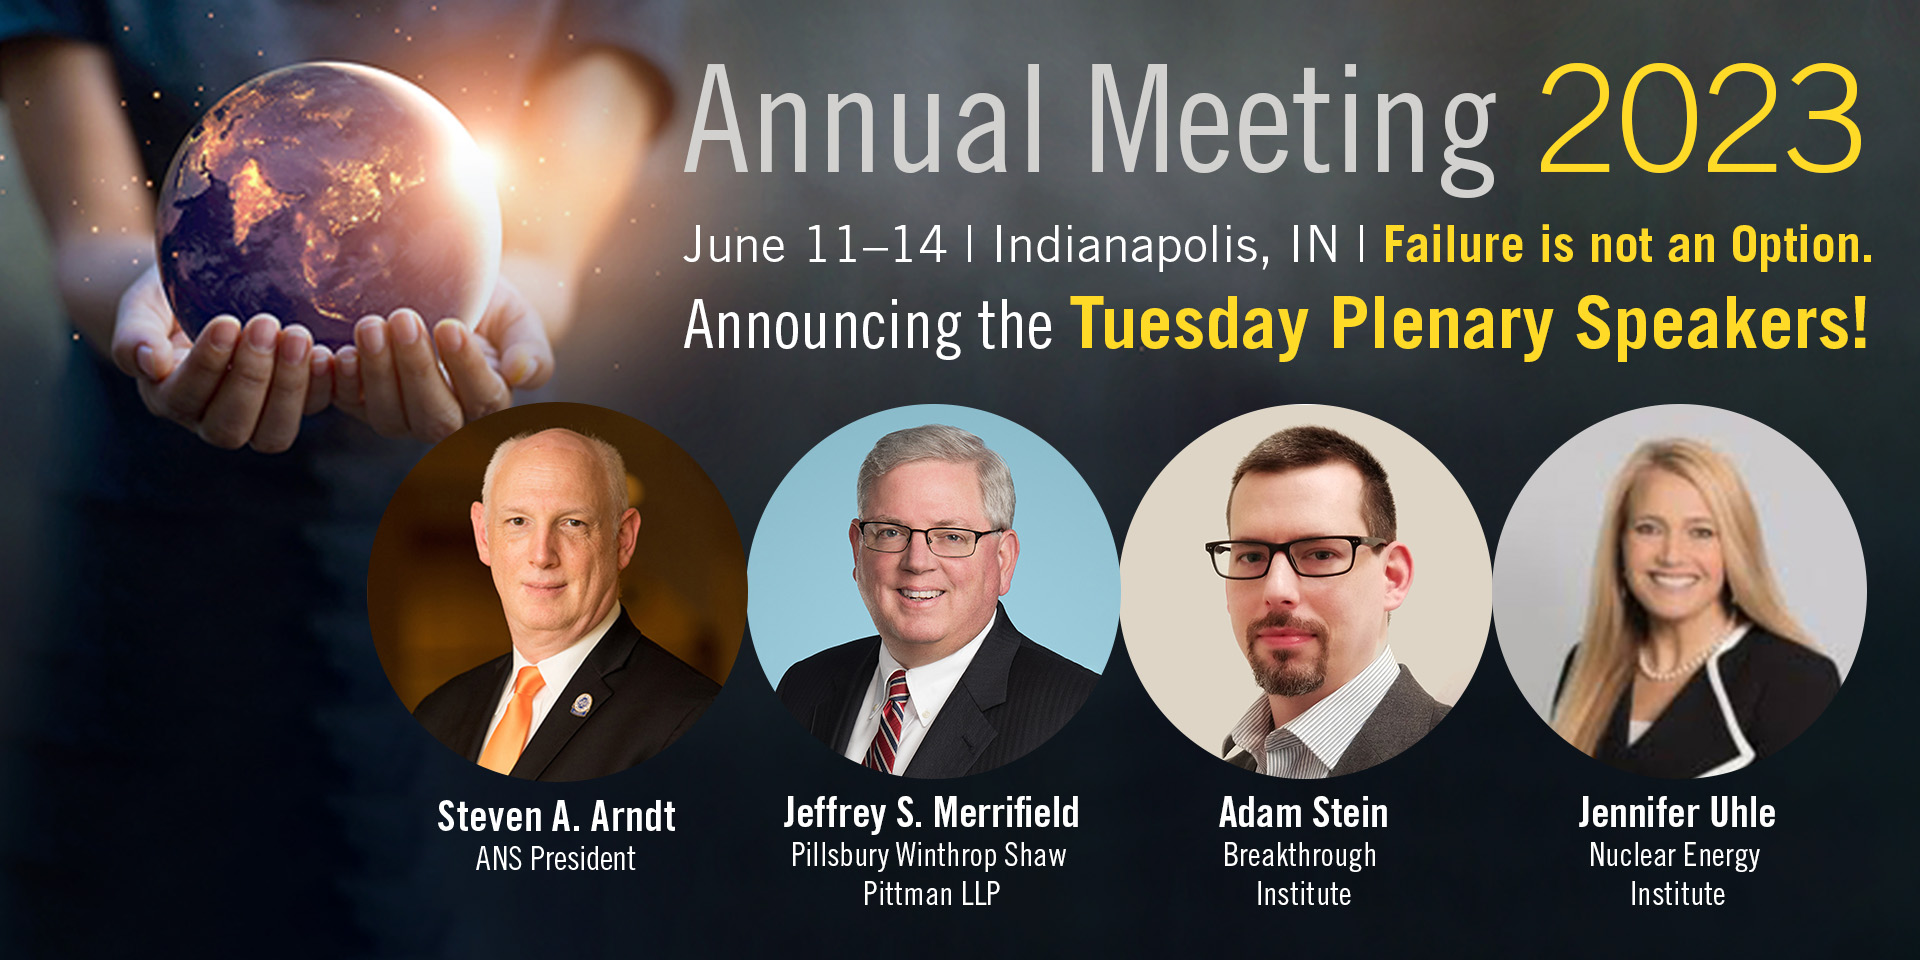 Register now and join us in Indianapolis next month!